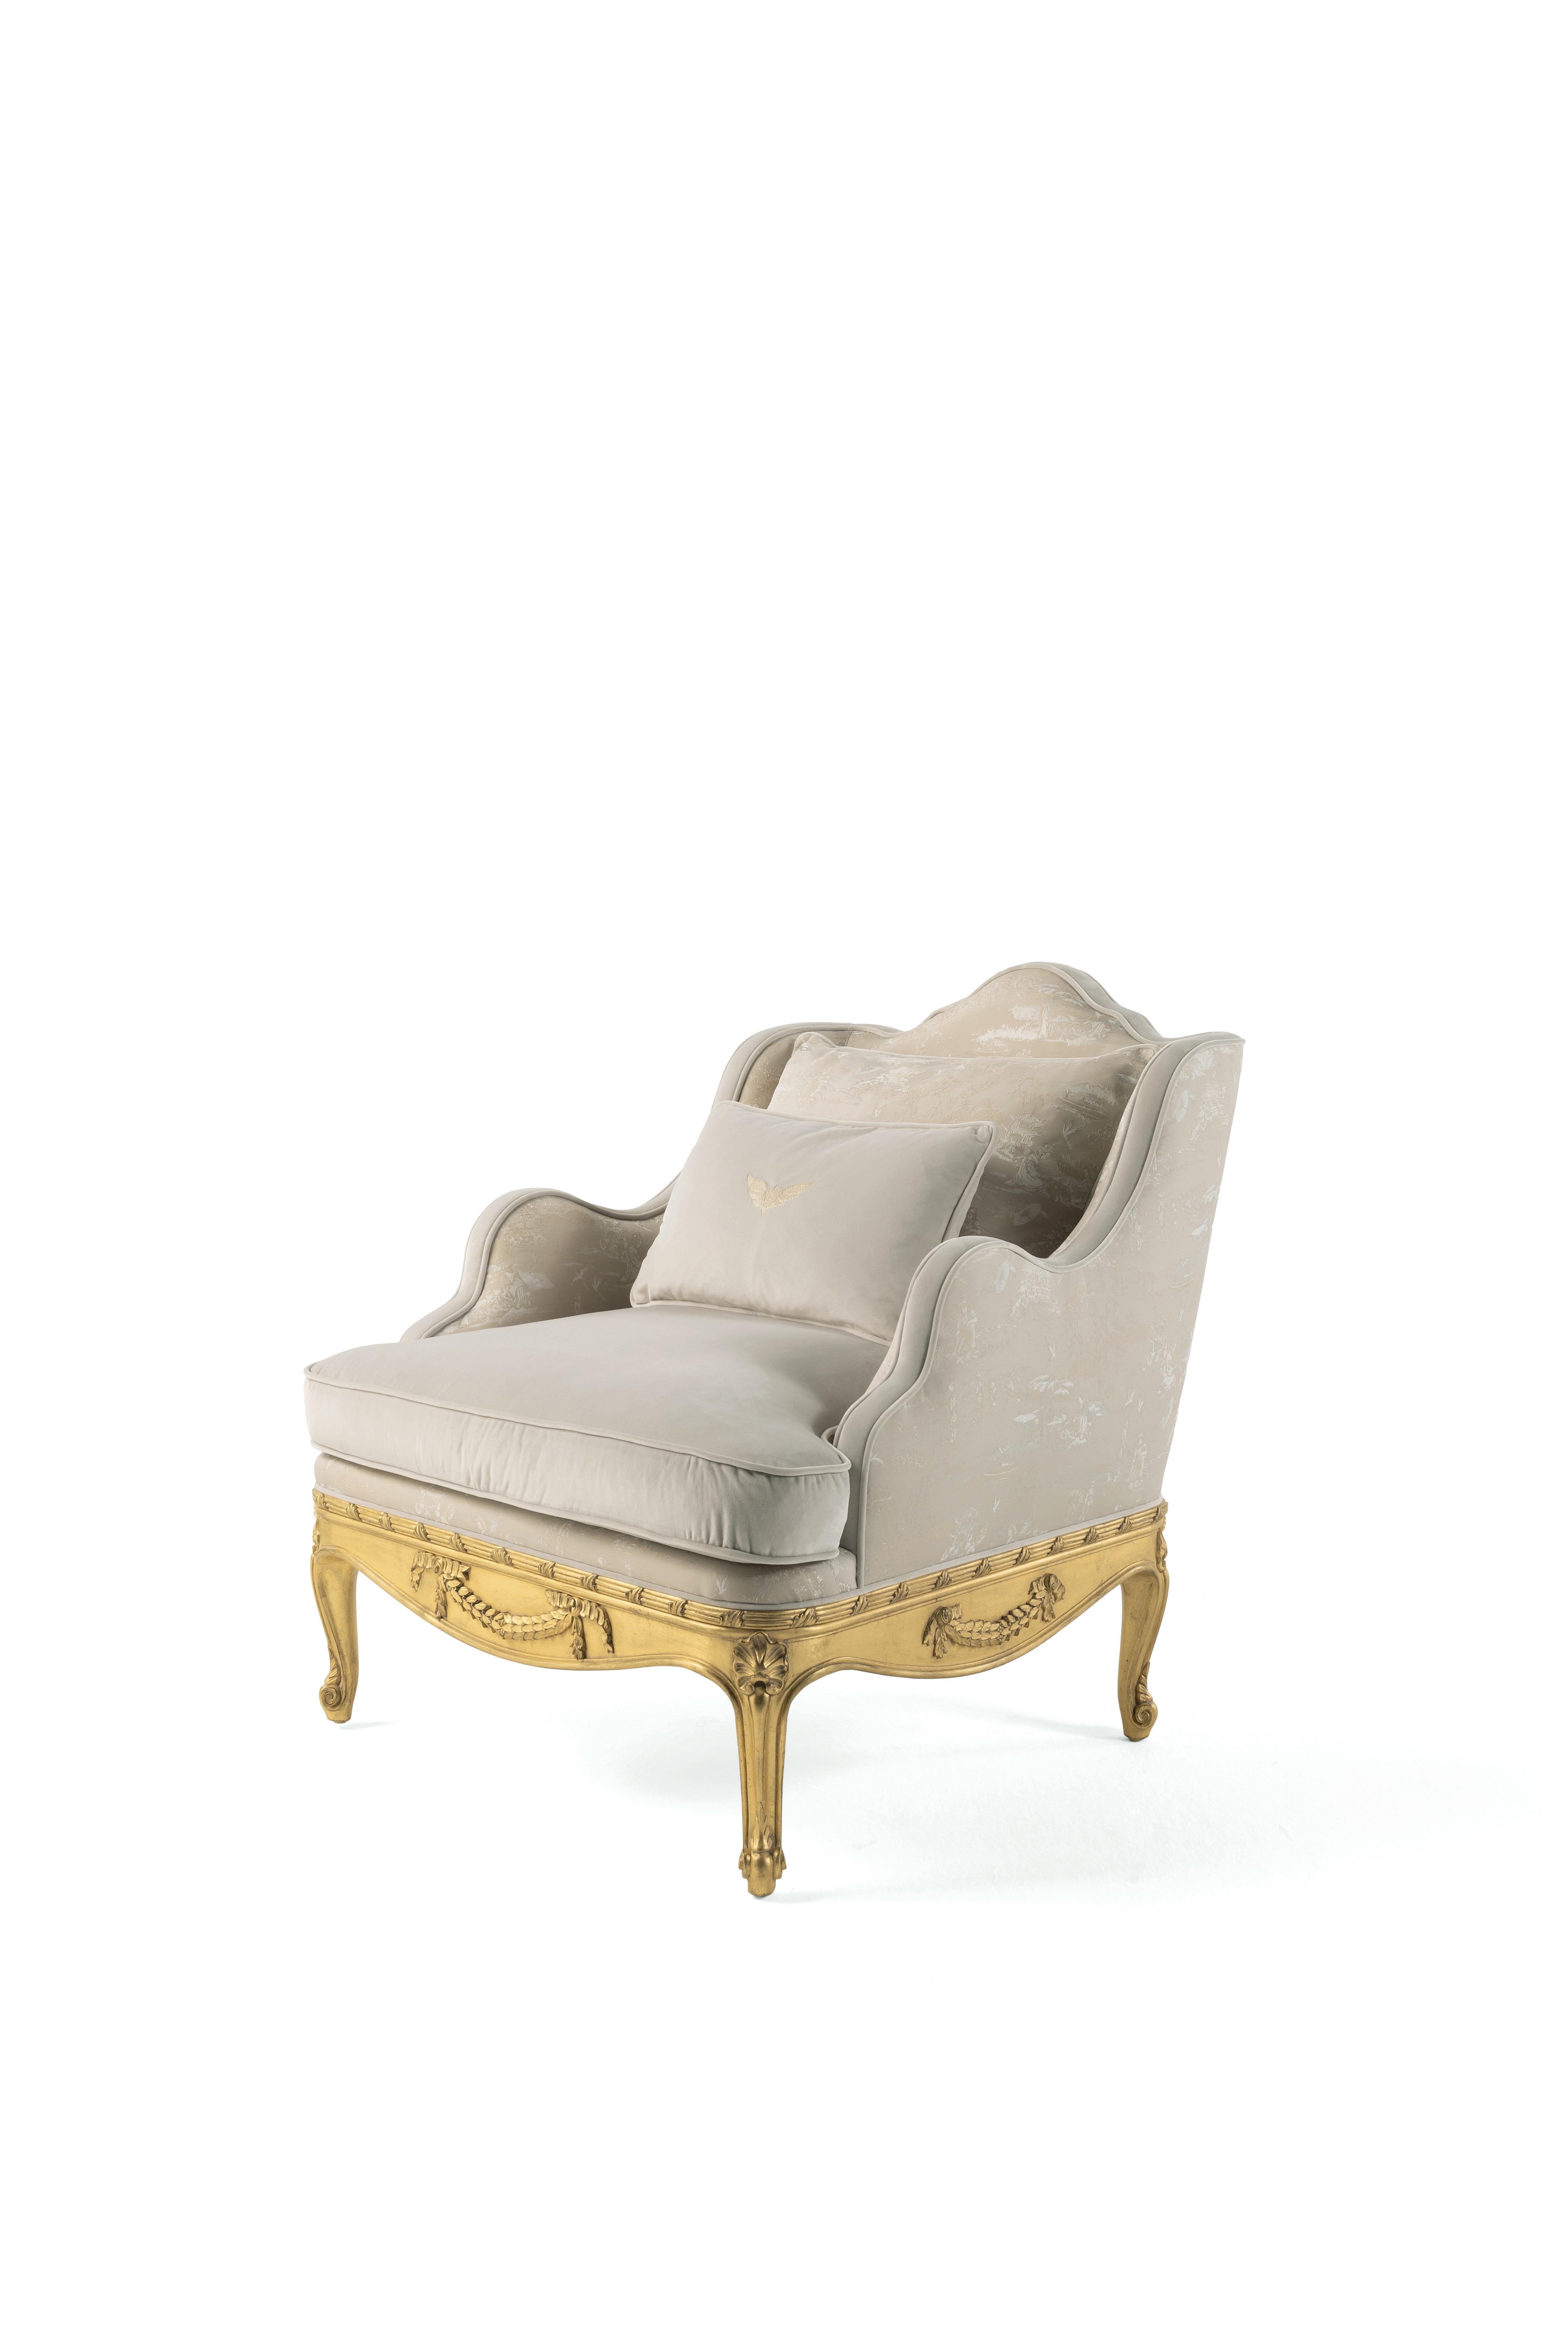 Louis XVI 21st Century Verveine Armchair in Fabric with Gold Leaf Finishing For Sale